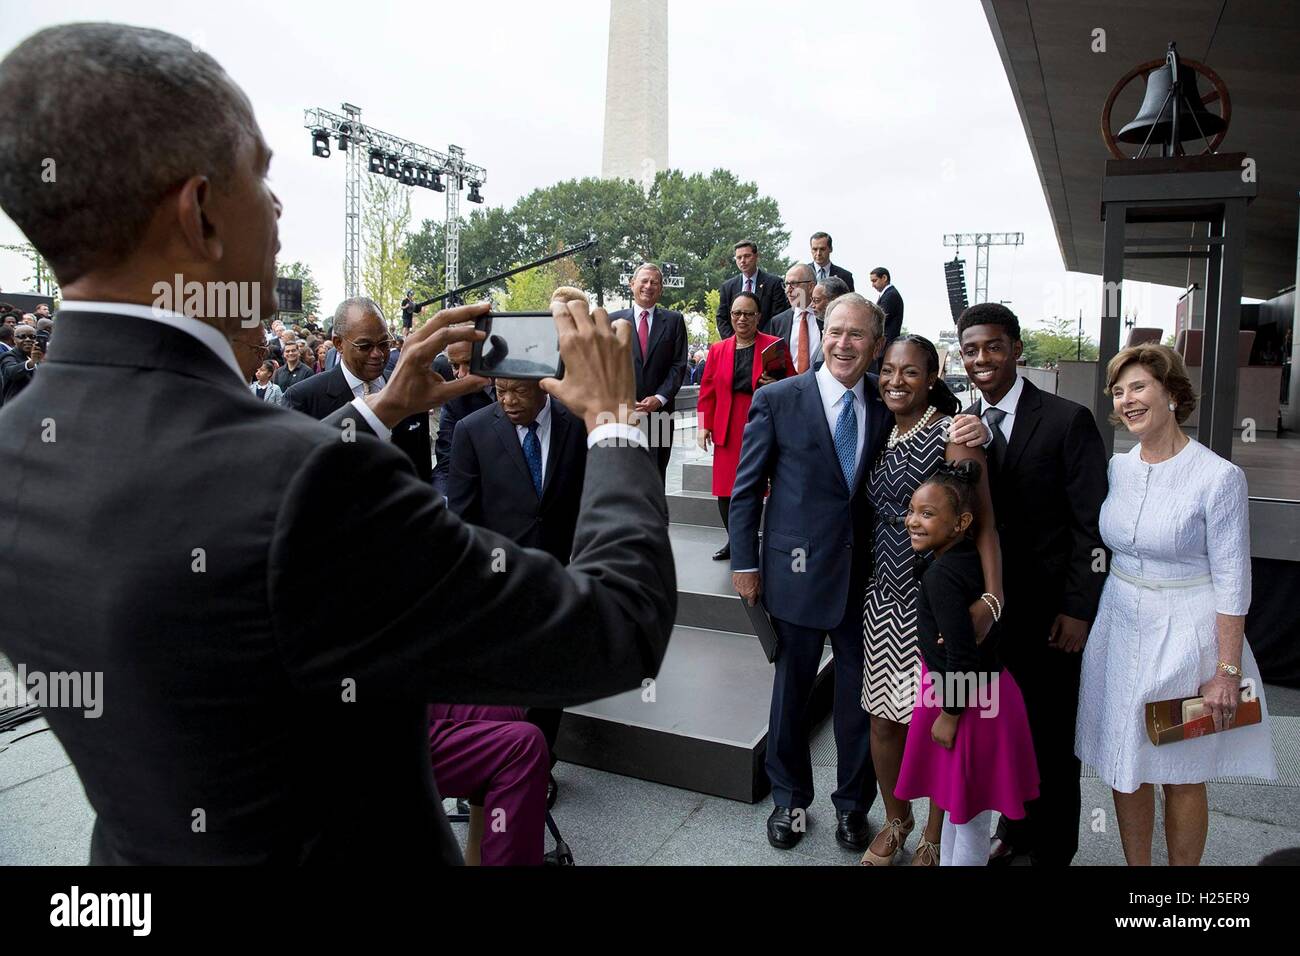 U.S.President Barack Obama takes a photo of former President George W. Bush, former First Lady Laura Bush and members of the Bonner Family following the opening of the Smithsonian National Museum of African American History and Culture September 24, 2016 in Washington, D.C. The Bonner Family are fourth generation descendants of Ellijah B. Odom, a young slave who escaped to freedom. Stock Photo